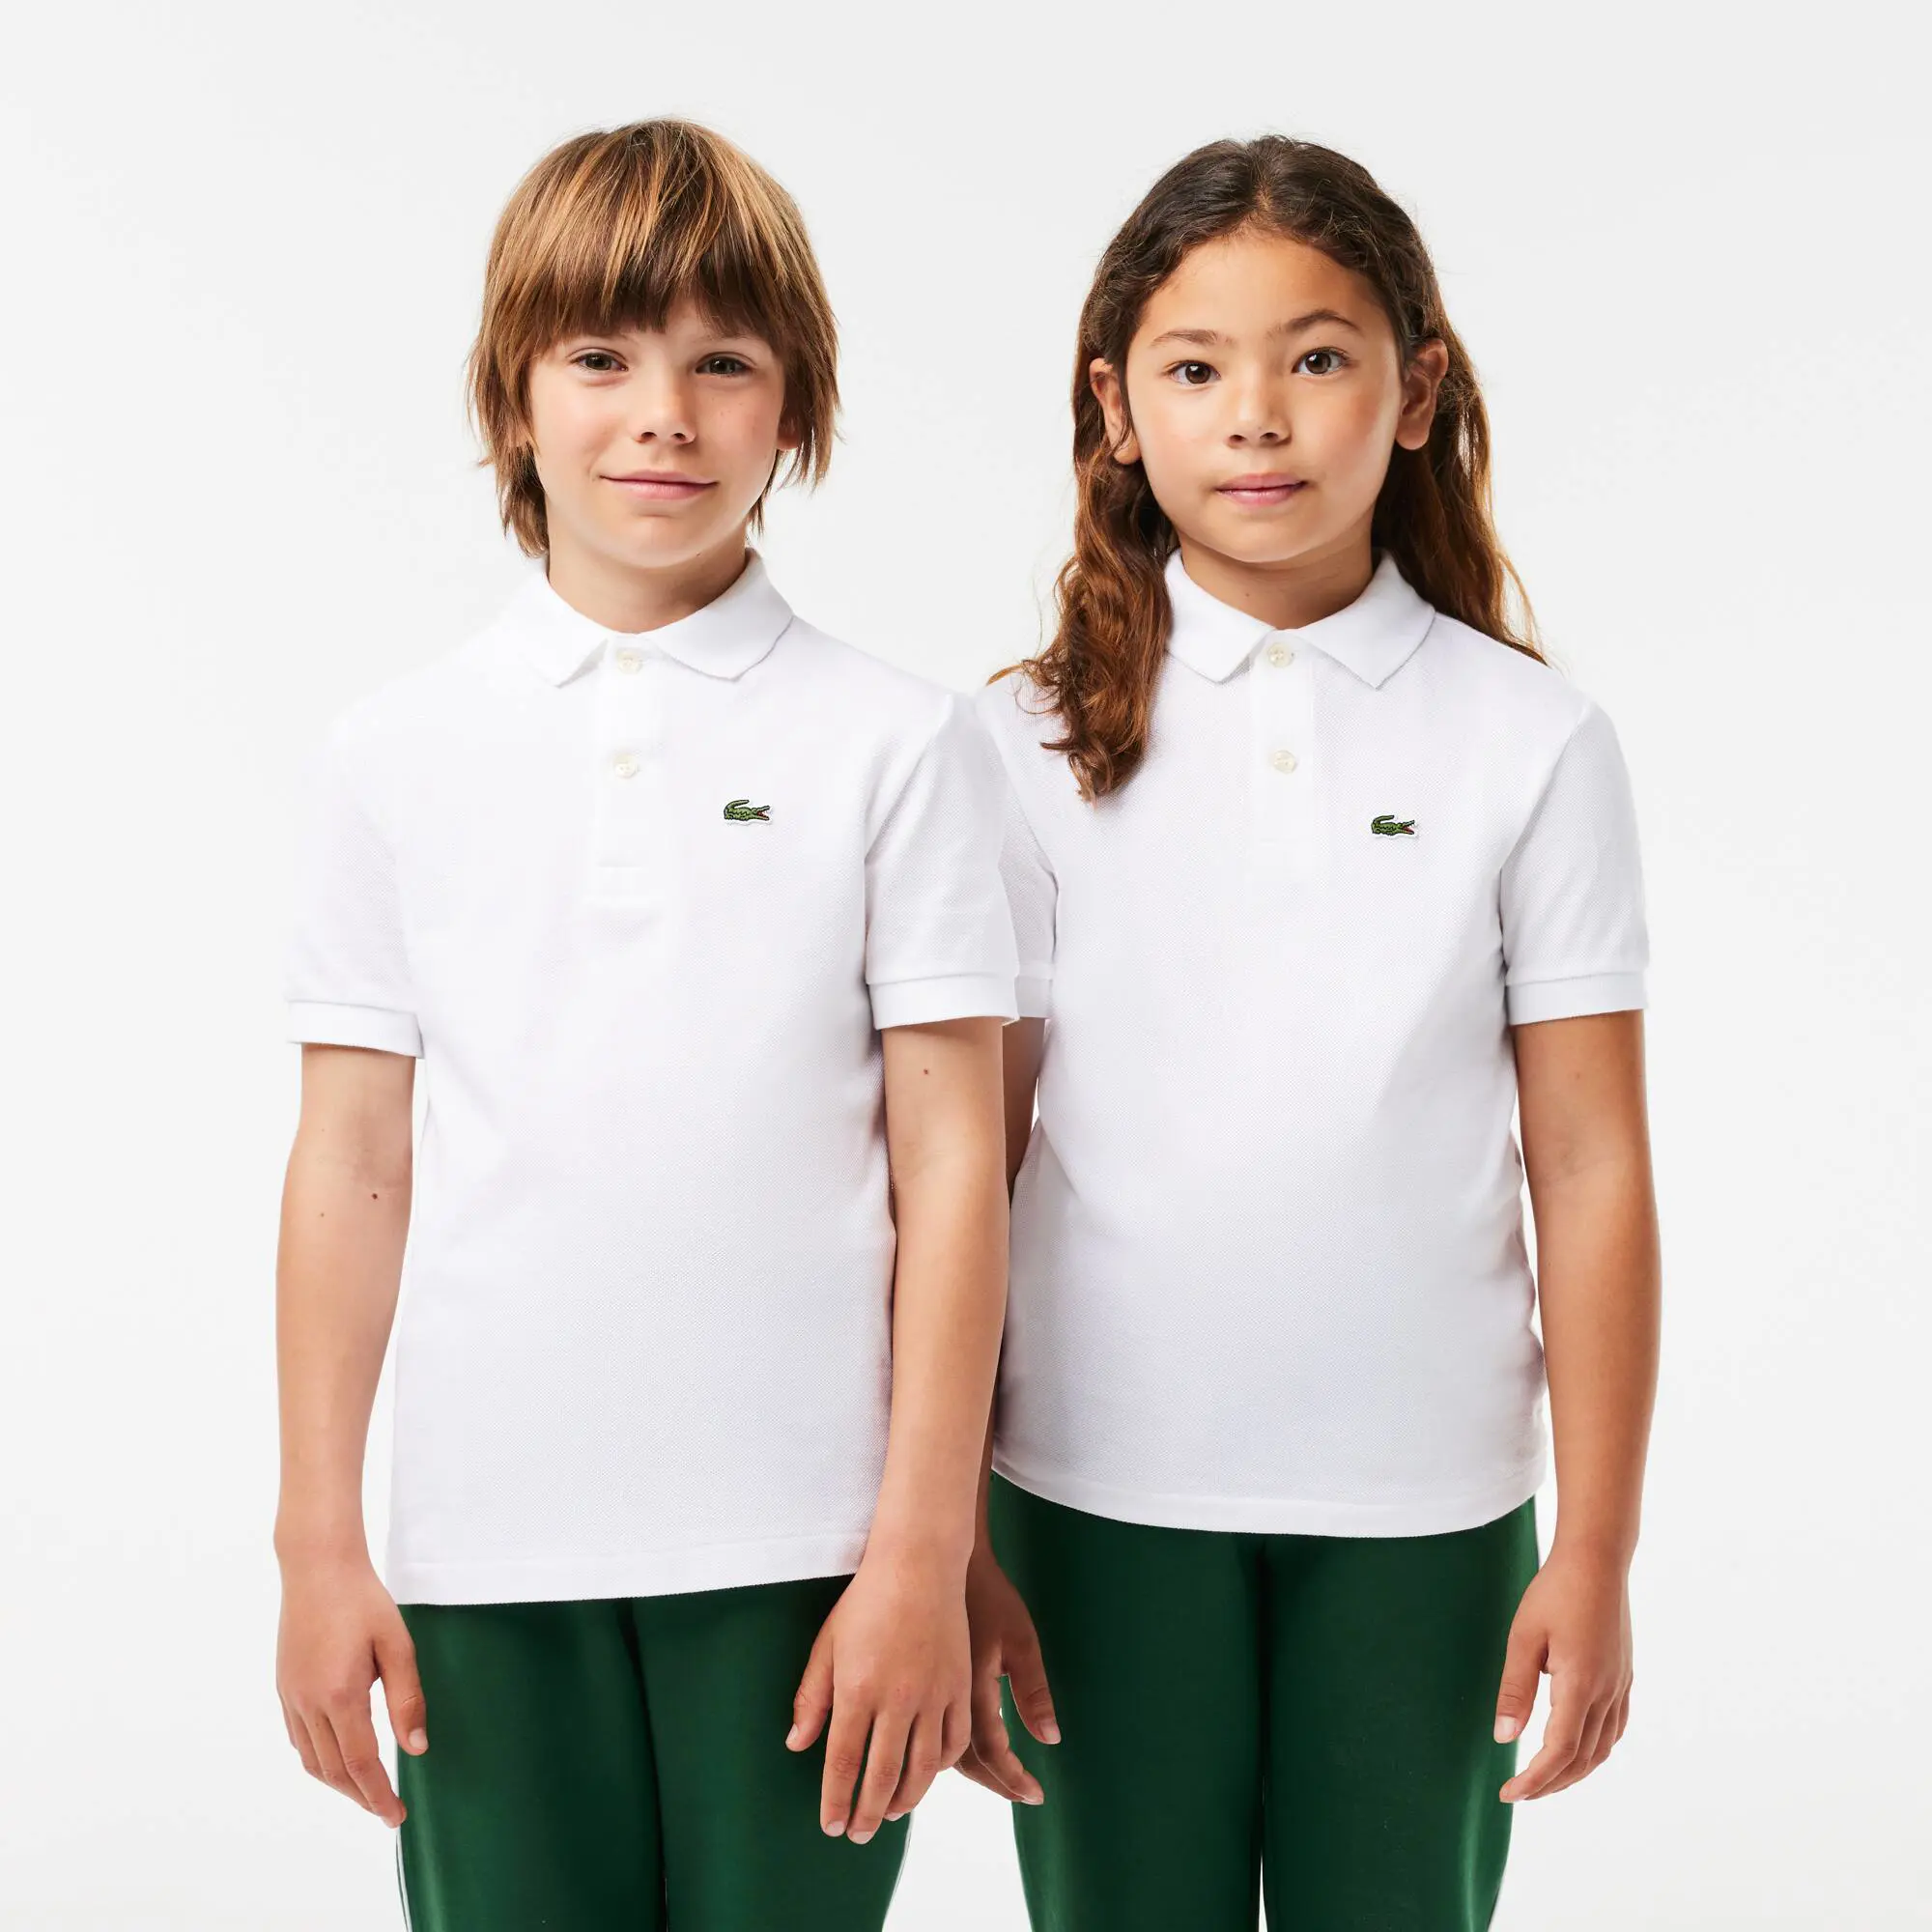 Lacoste Individuelles Lacoste Kinder Polo. 1